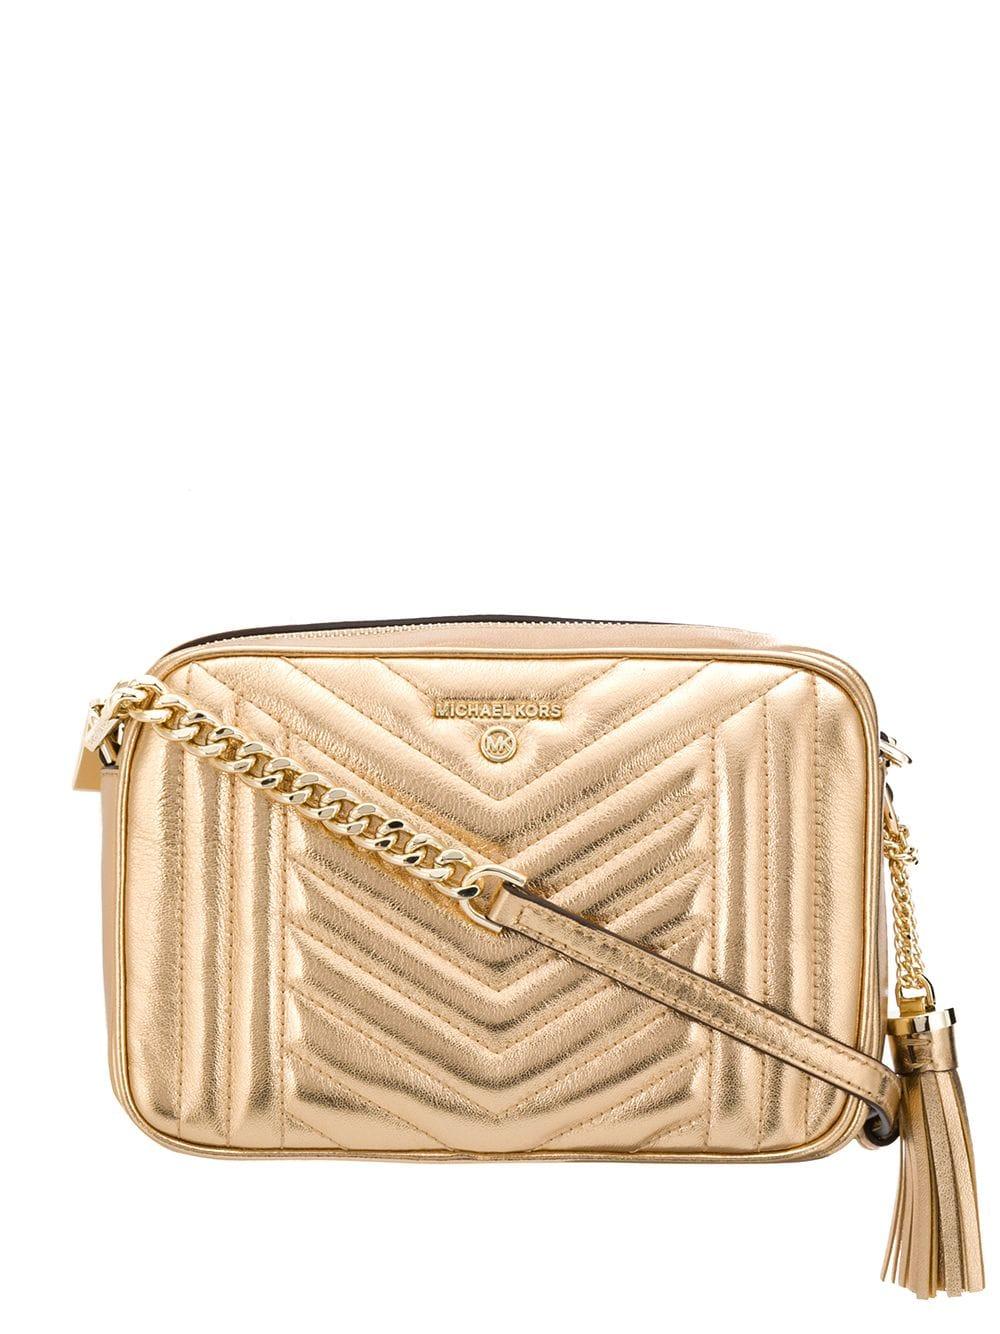 MICHAEL Michael Kors Leather Jet Set Quilted Camera Bag in Gold (Metallic) - Save 38% - Lyst